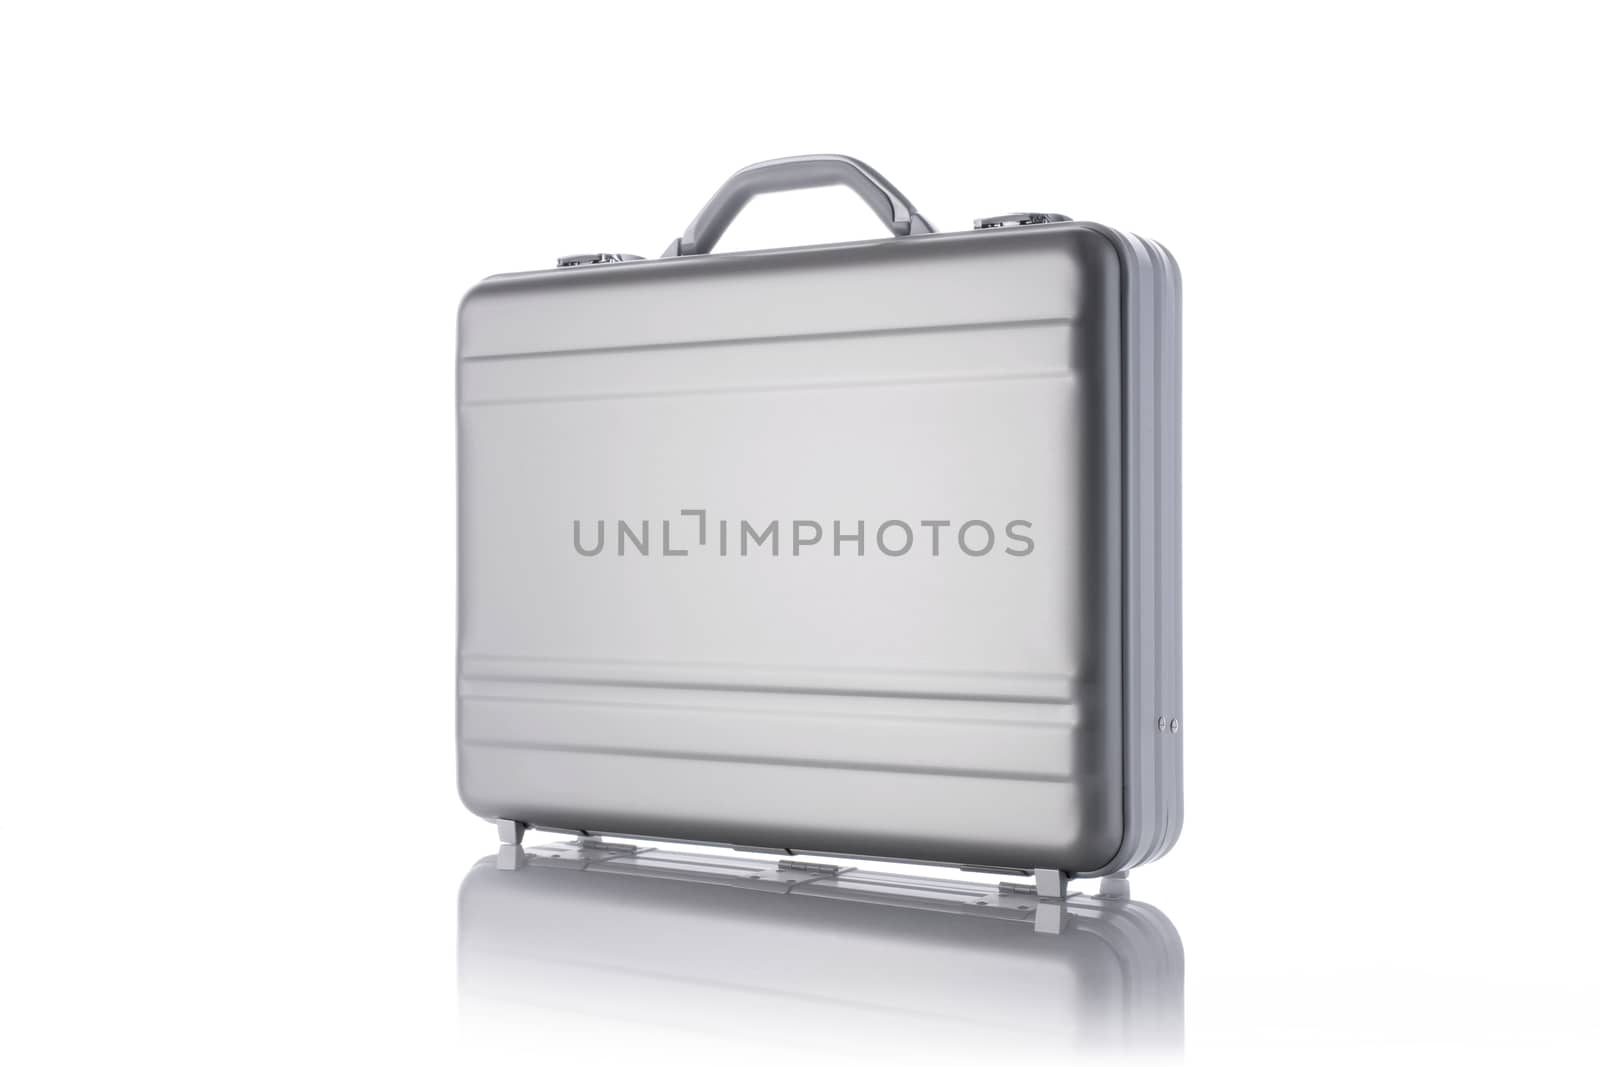 Metal briefcase on a white background by janssenkruseproductions